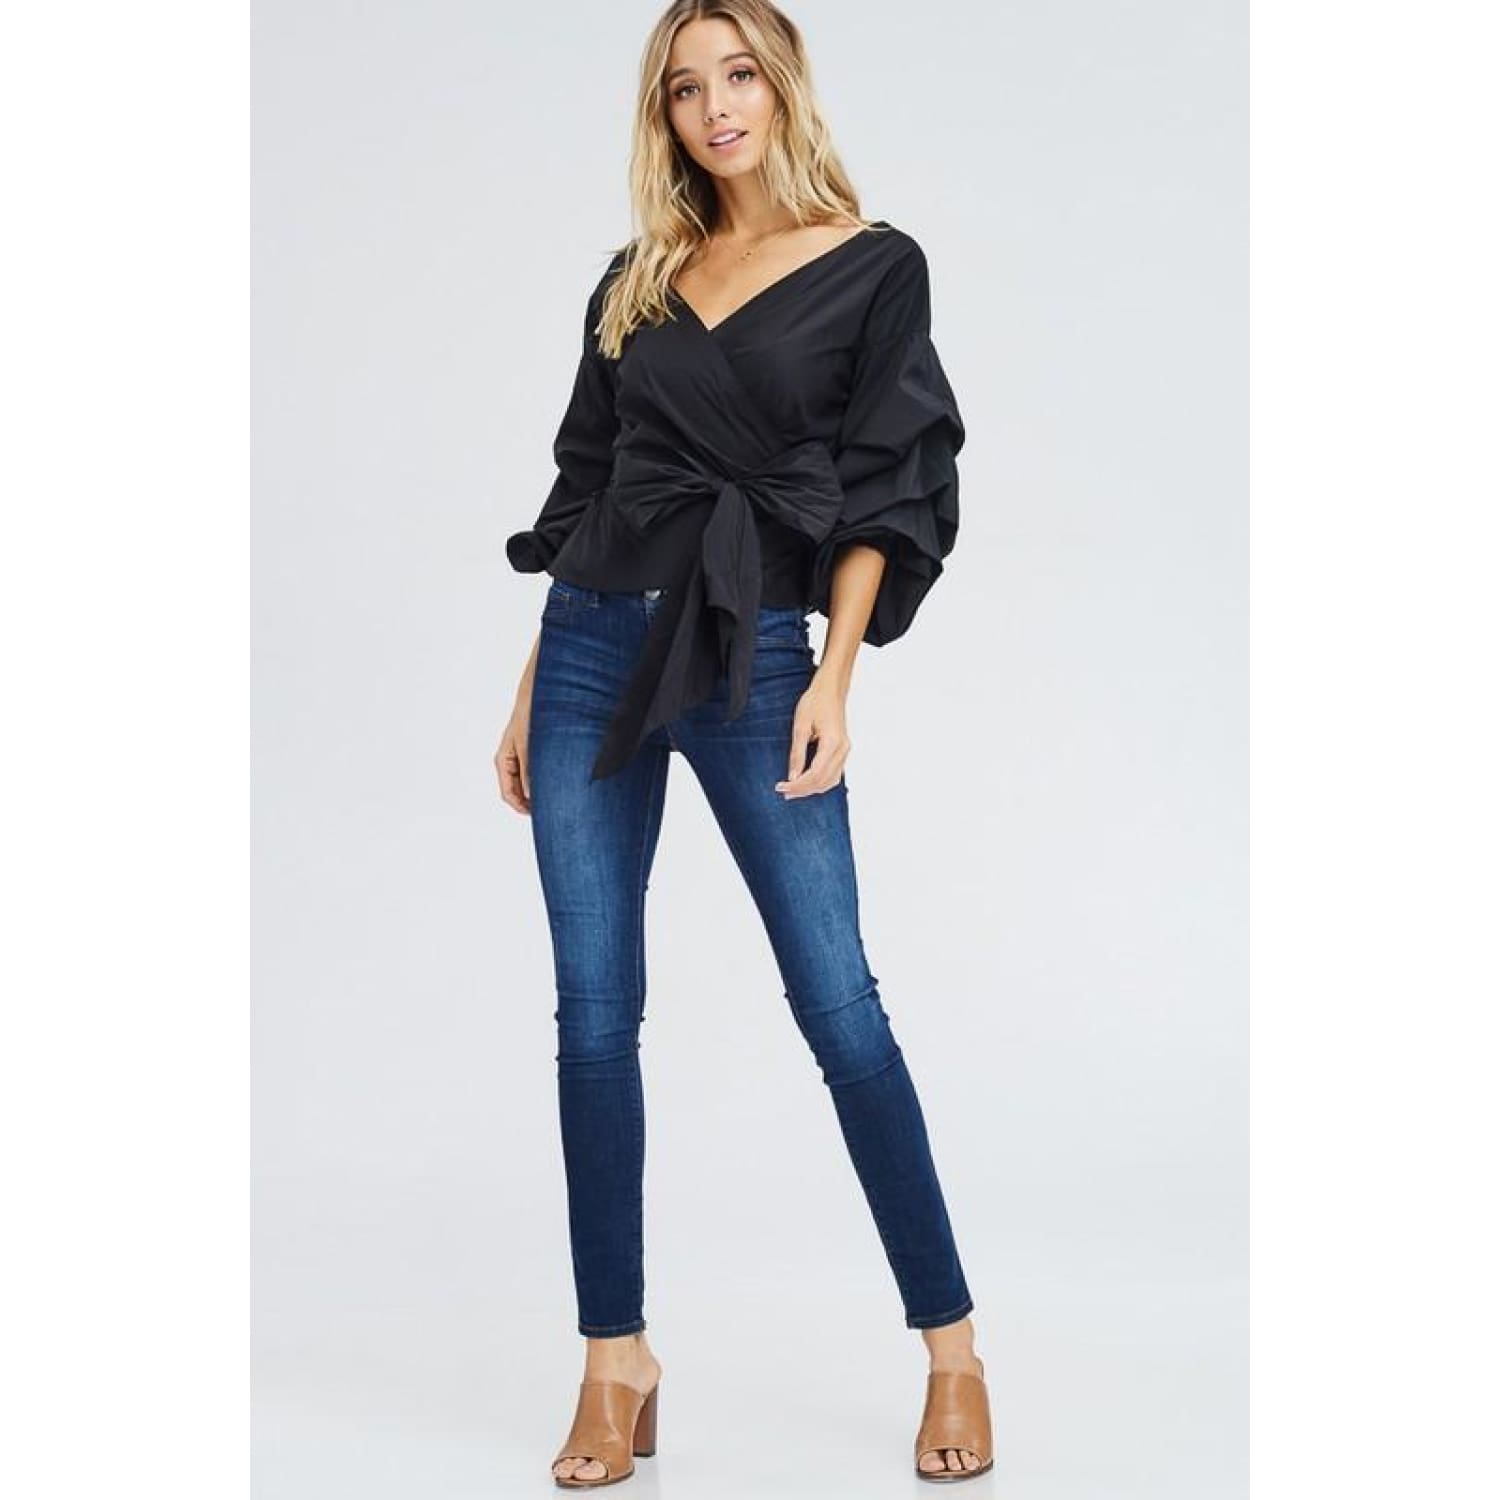 Wrap Blouse with Bow- Black - Best YOU by HTS